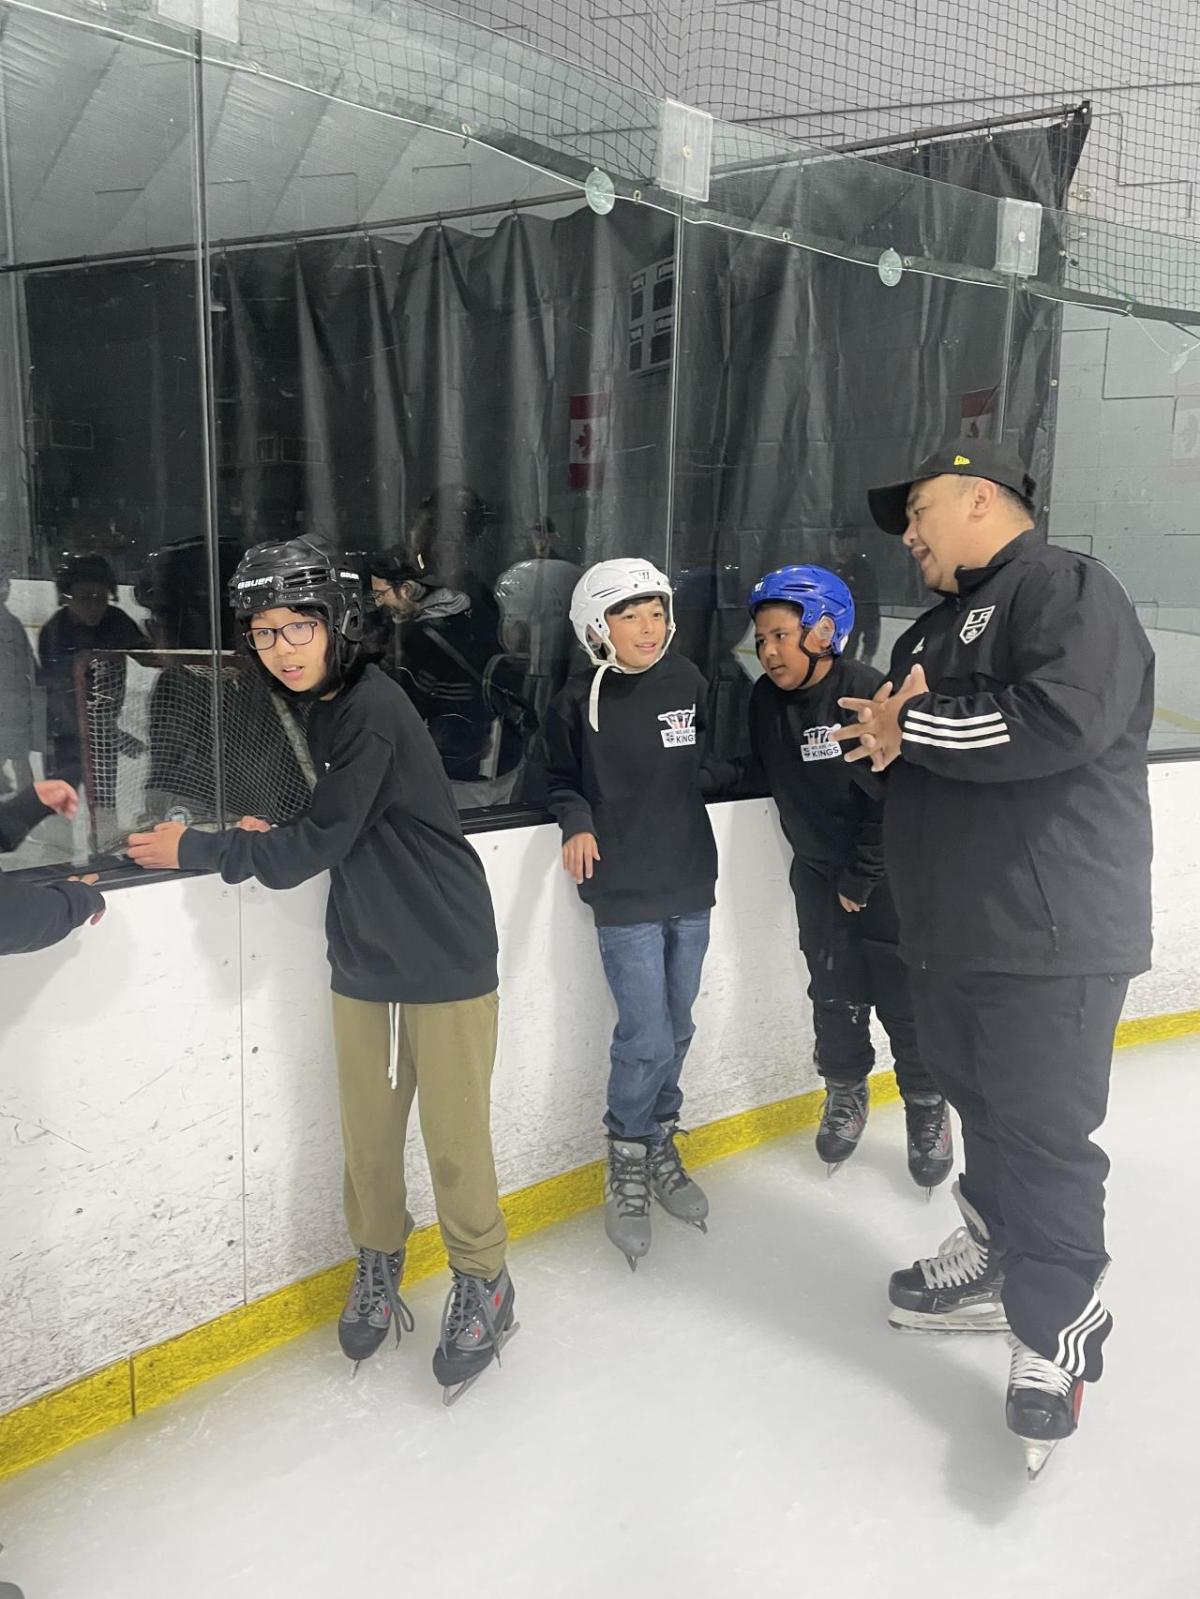 Children from SIPA learned to skate with the LA Kings Ice Crew.